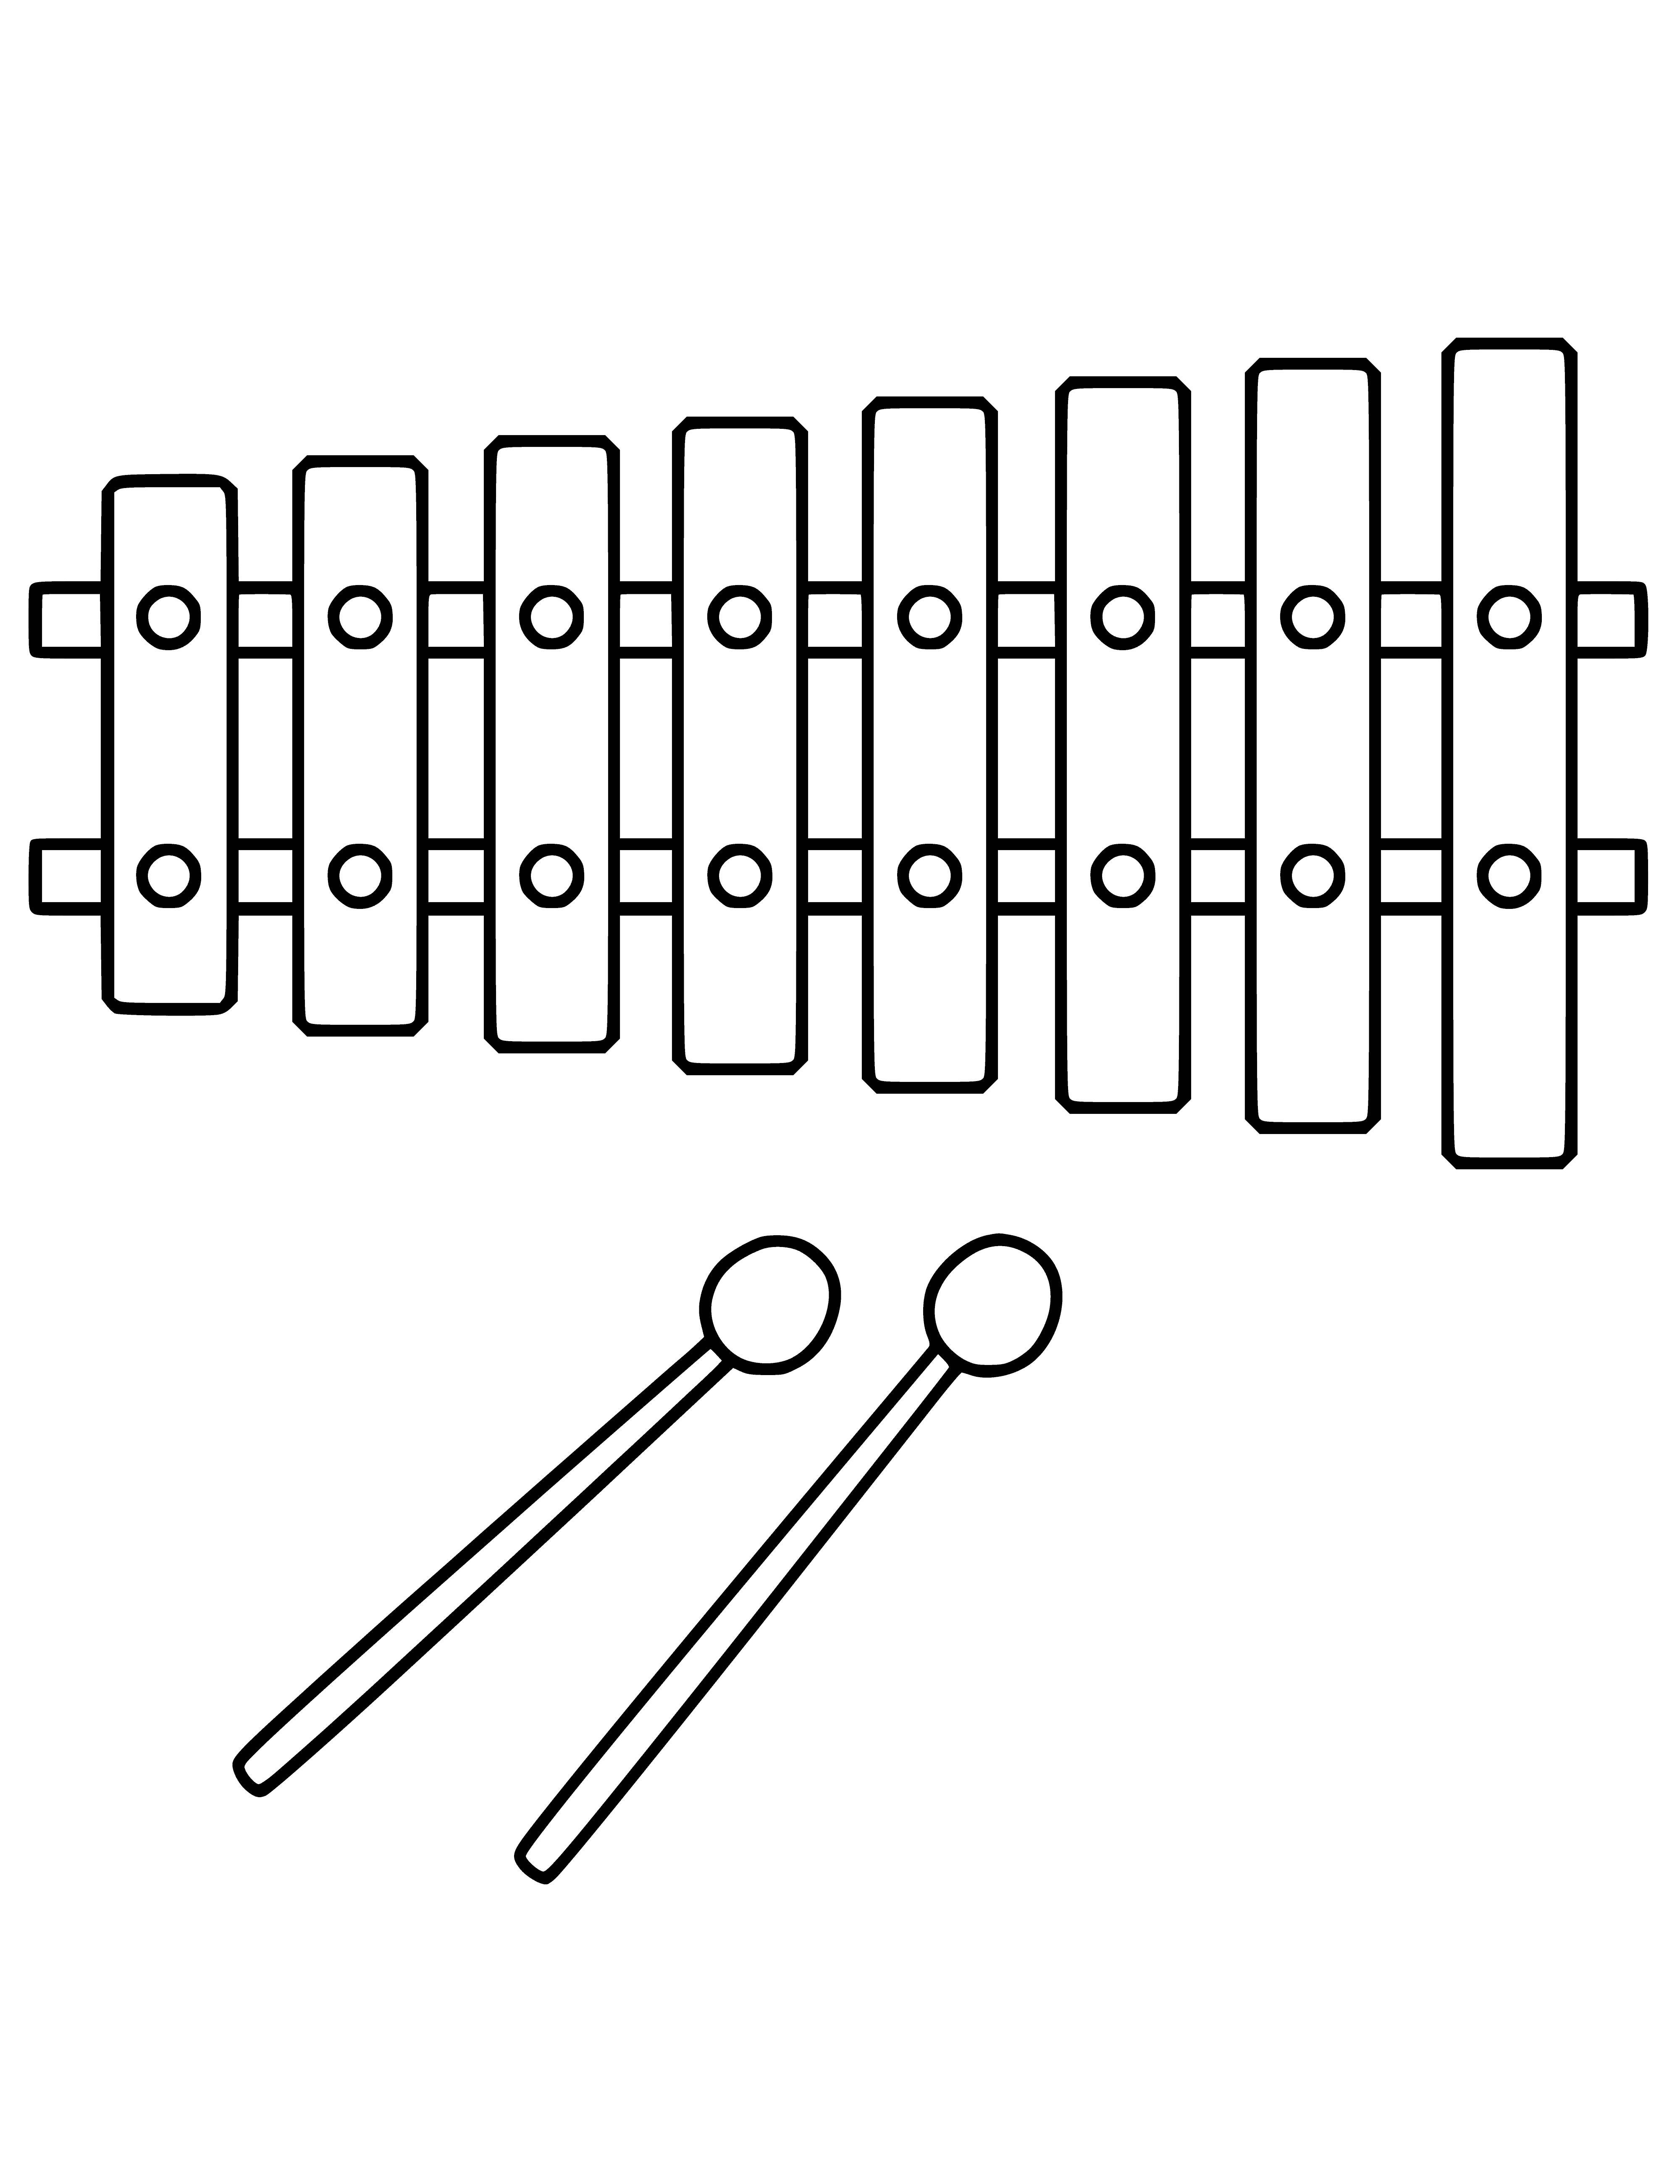 coloring page: A musical instrument called a glockenspiel, consisting of tuned keys arranged in a scale, that produces different notes.